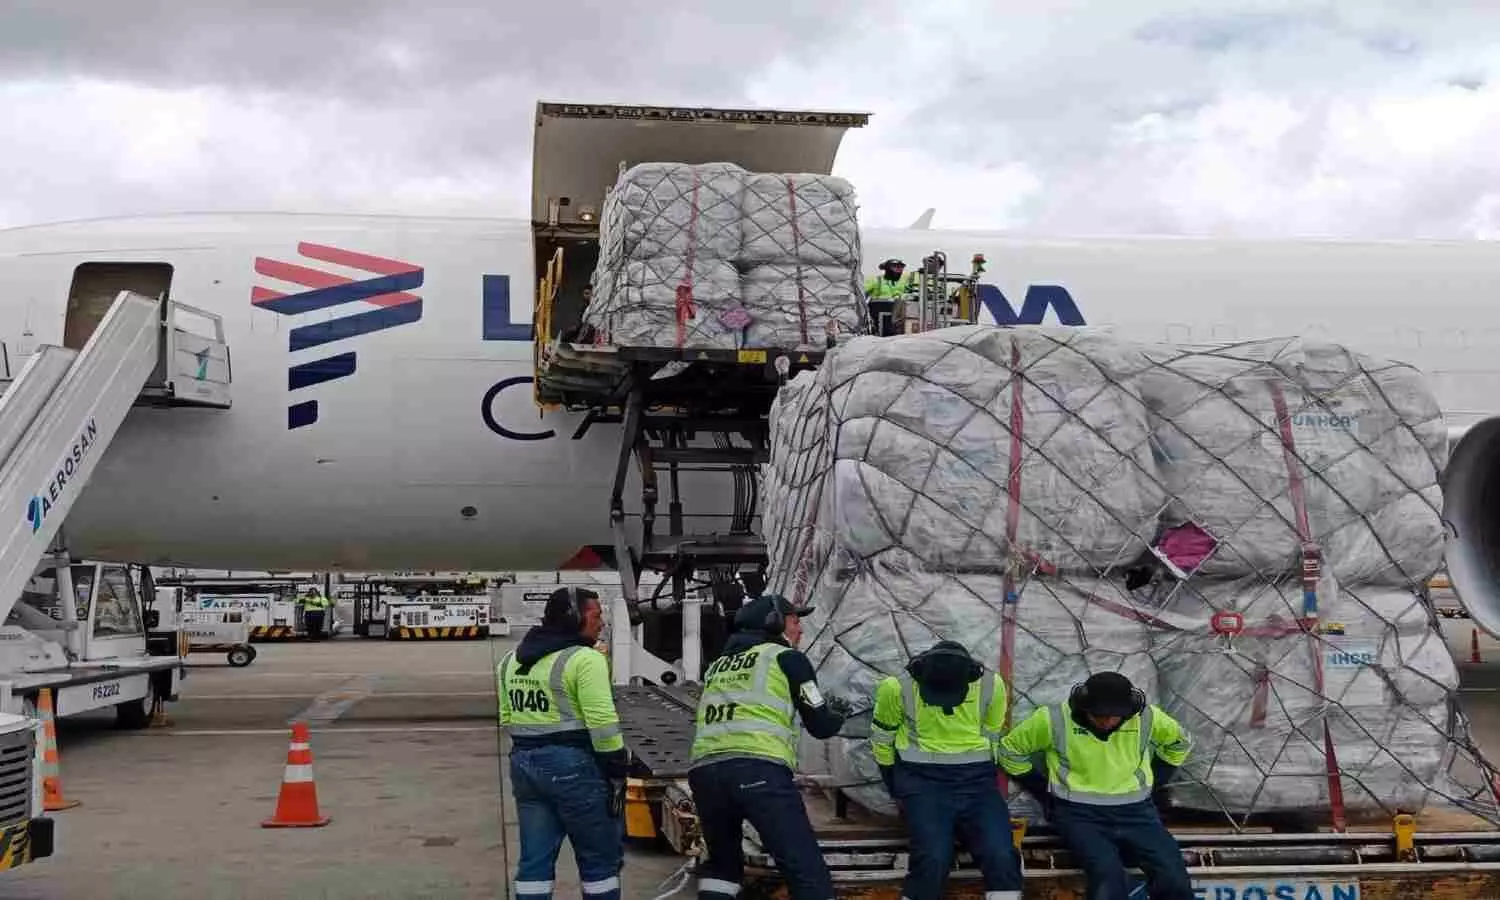 LATAM Group transports over 60 tonnes of humanitarian aid free of cost